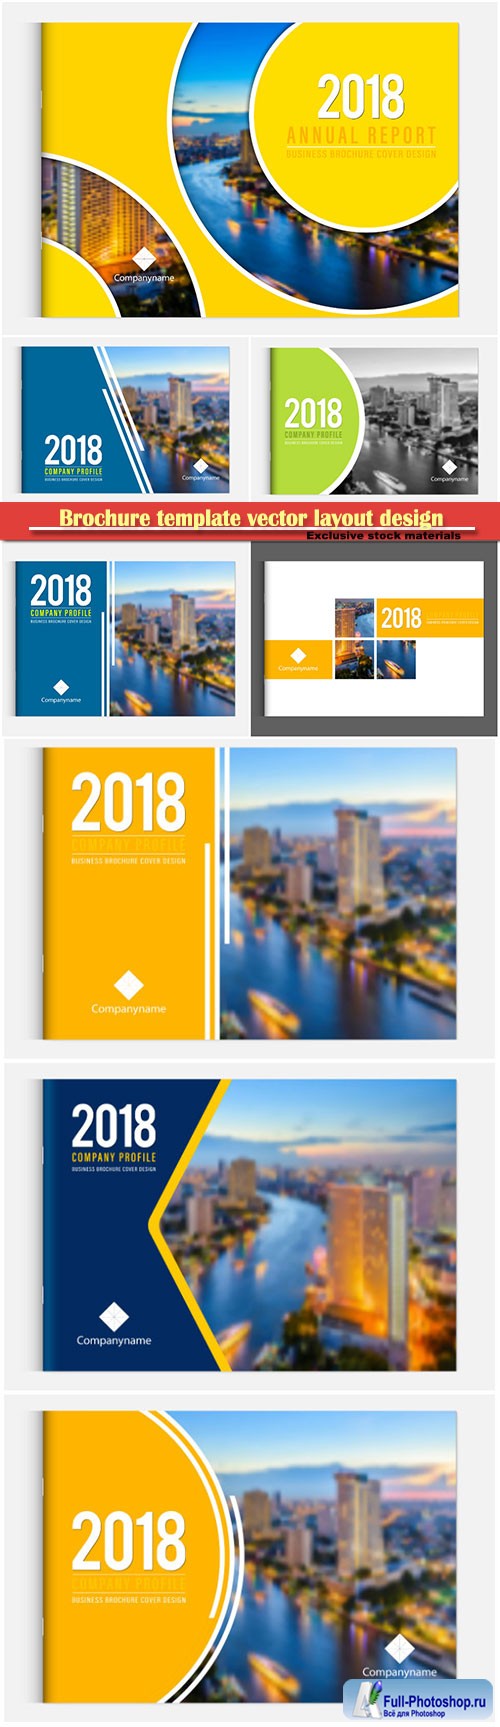 Brochure template vector layout design, corporate business annual report, magazine, flyer mockup # 158